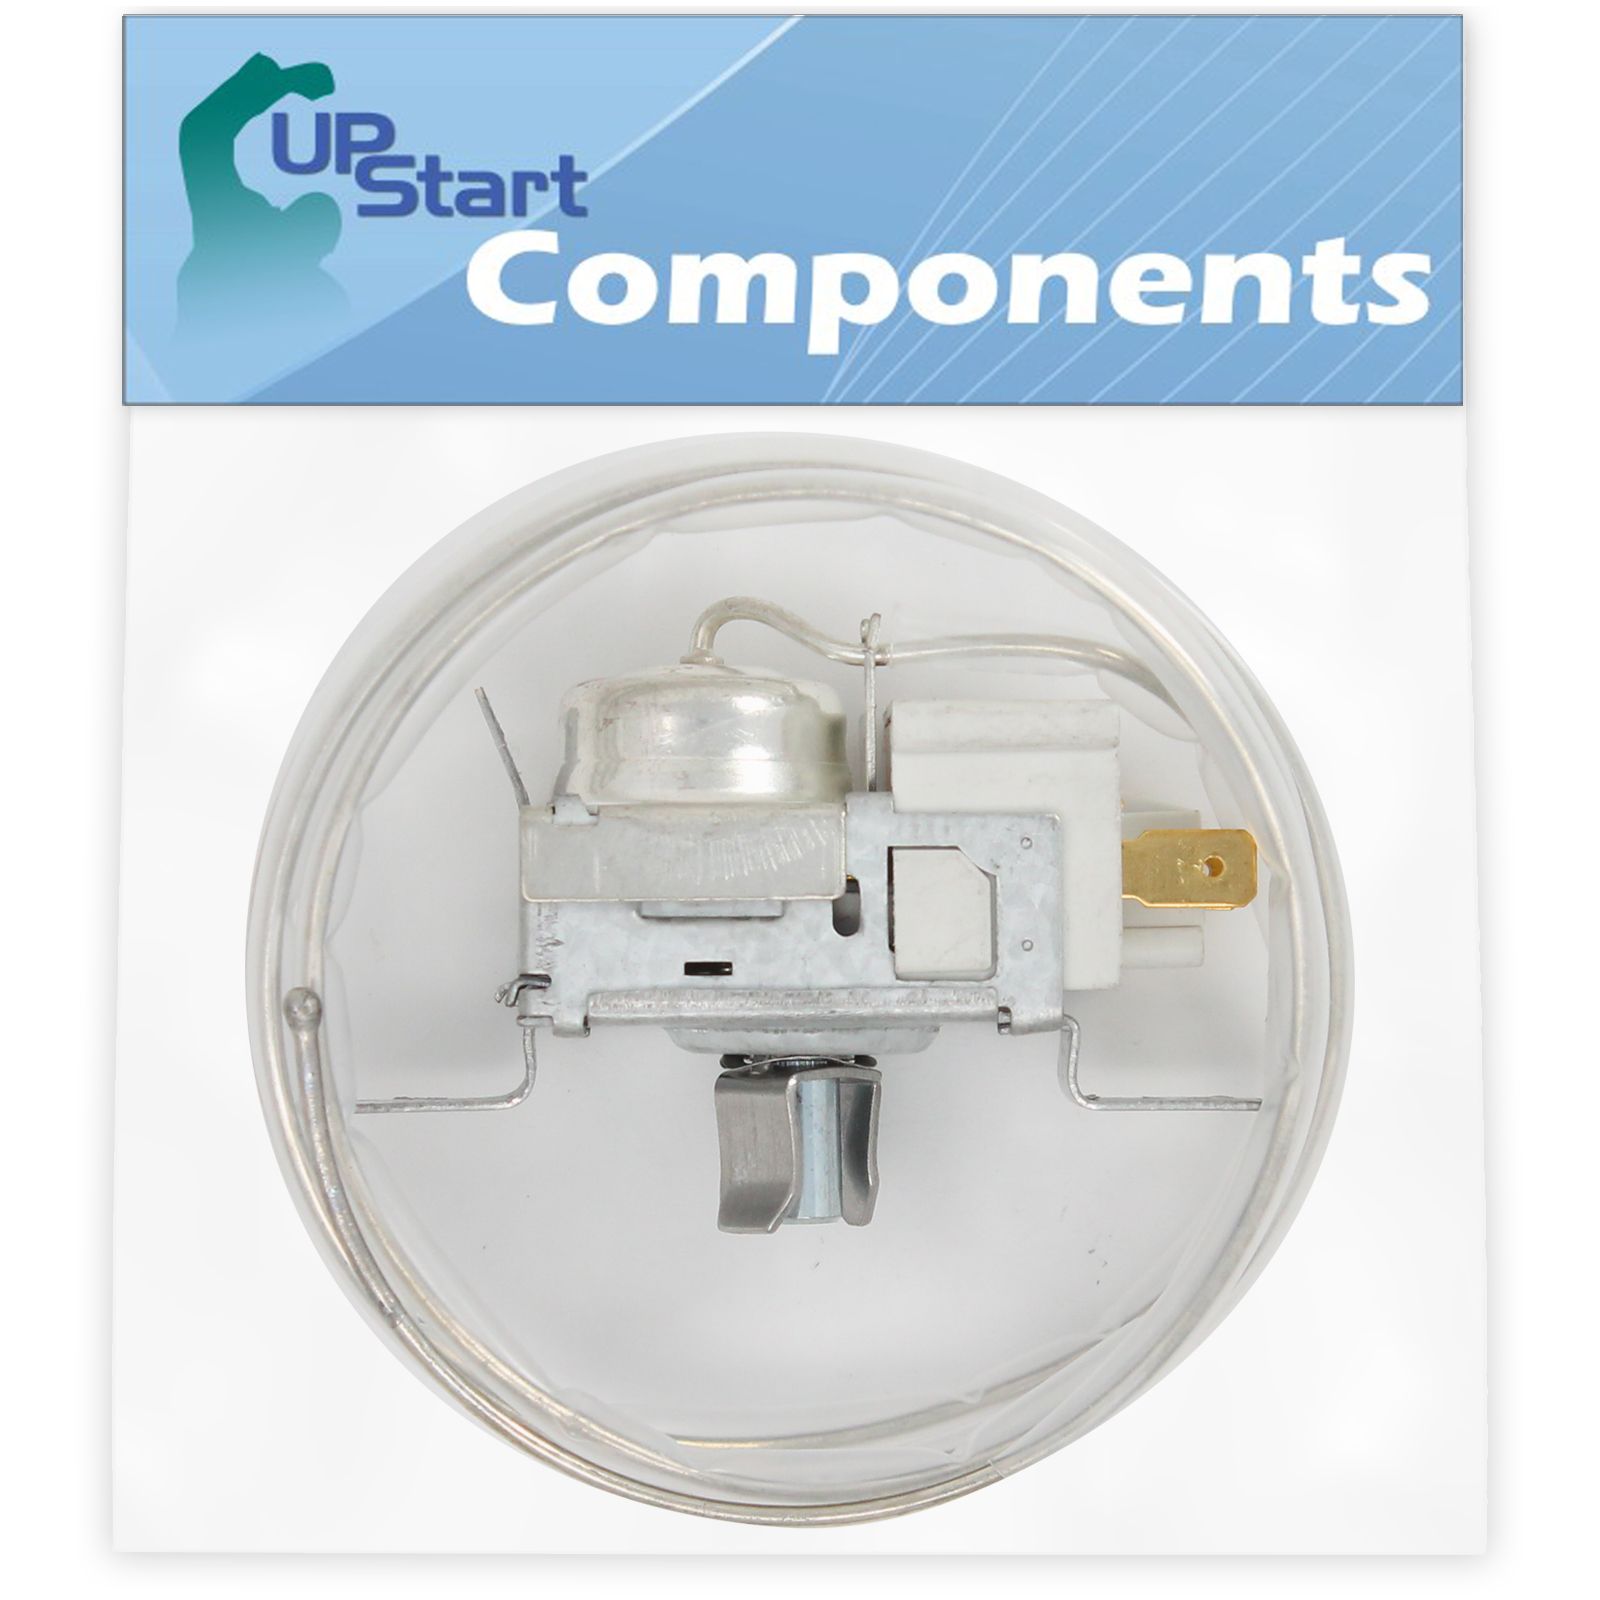 2198202 Cold Control Thermostat Replacement for Kenmore / Sears 10655138700 Refrigerator - Compatible with WP2198202 Refrigerator Temperature Control Thermostat - UpStart Components Brand - image 1 of 3